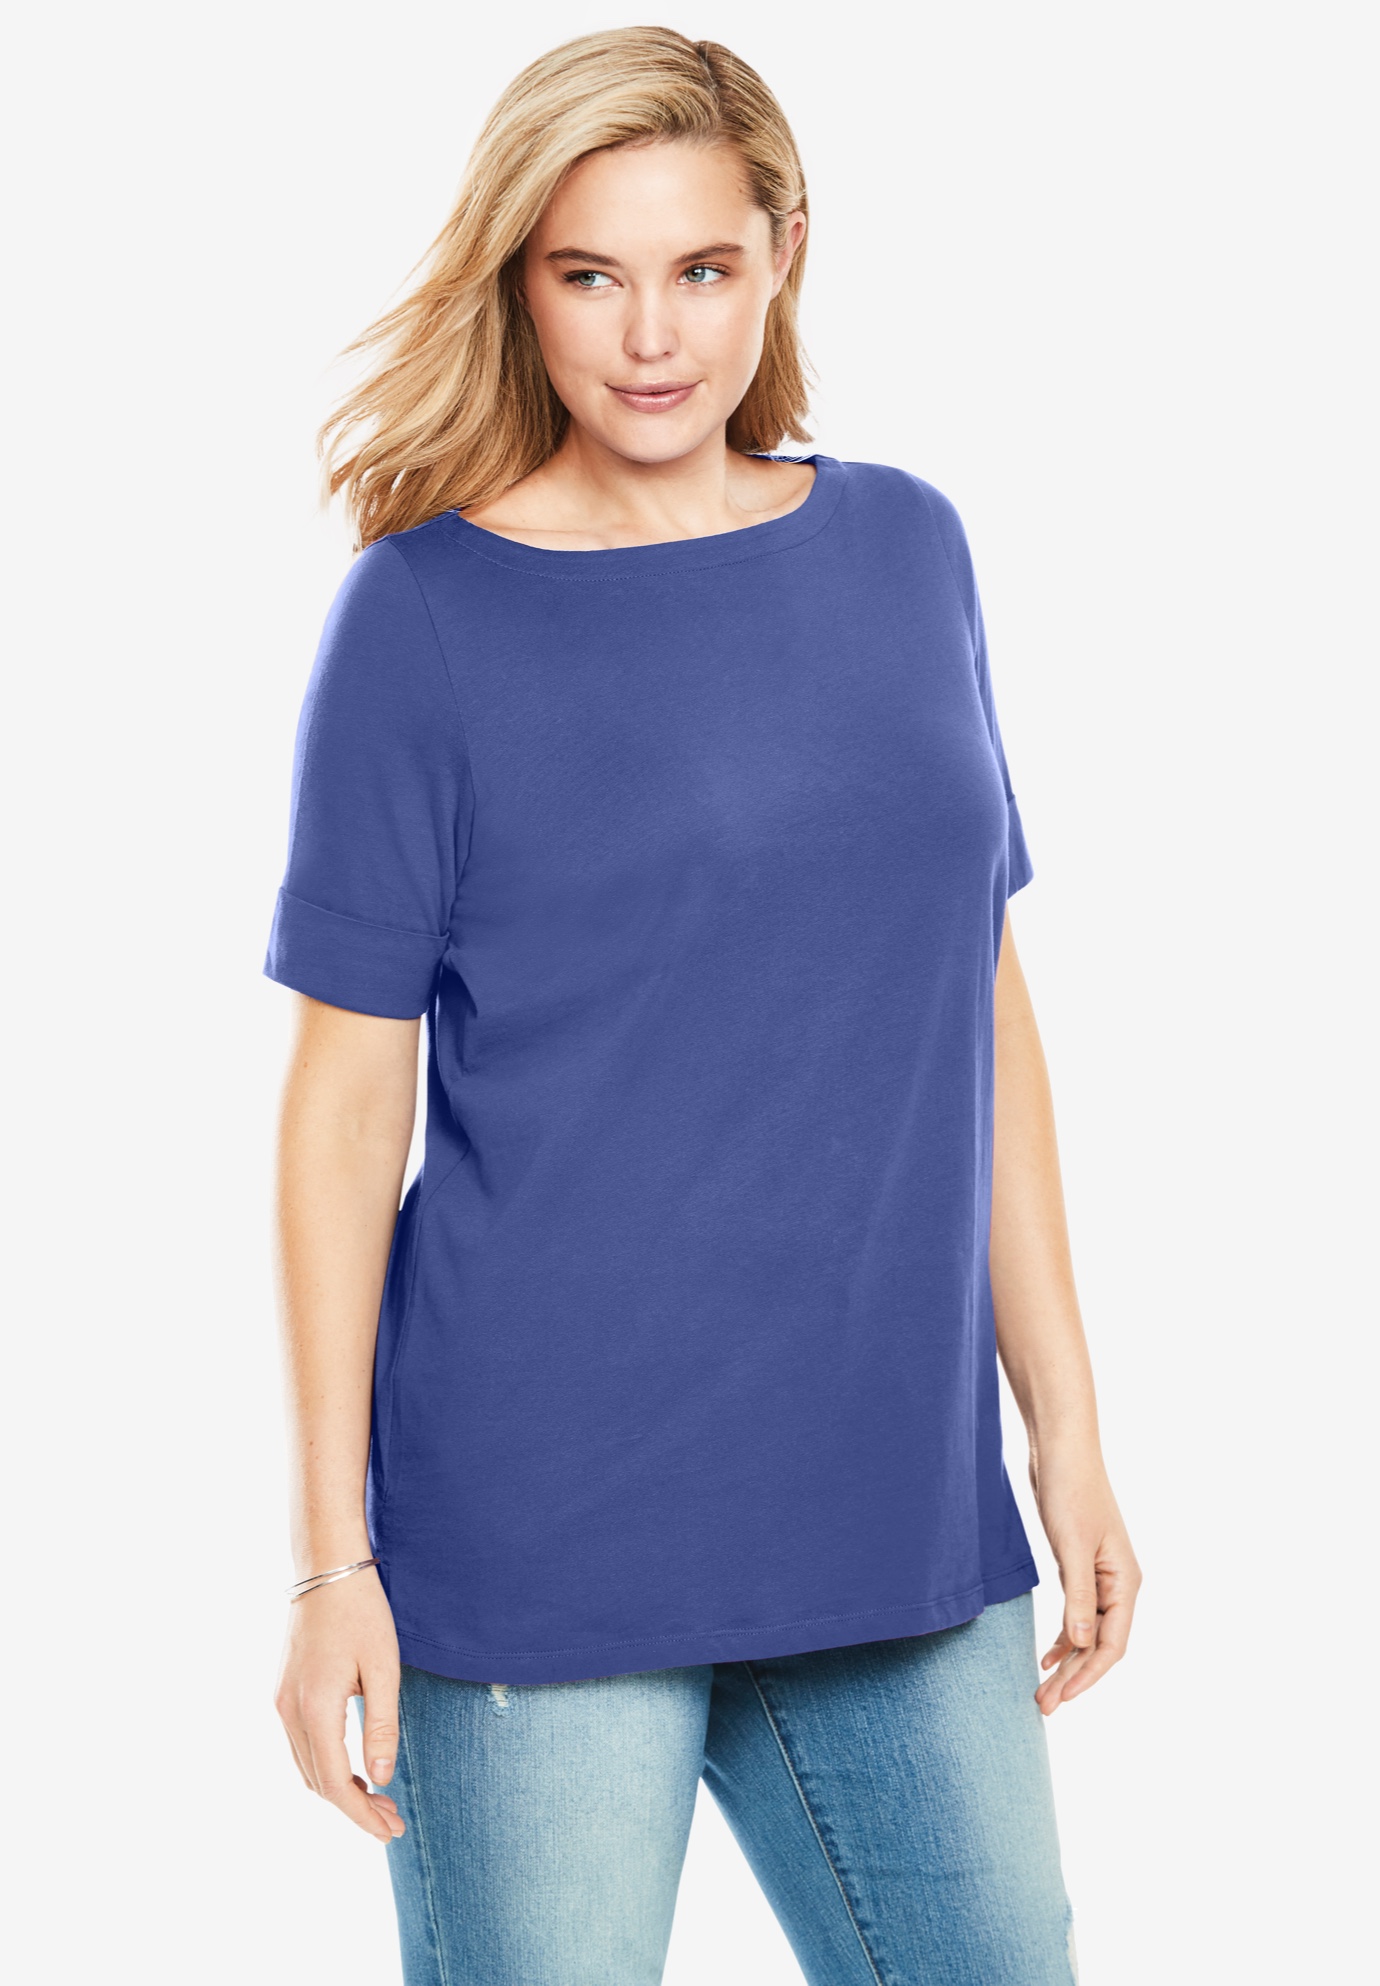 Perfect Cuffed Elbow-Sleeve Boat-Neck Tee | Fullbeauty Outlet